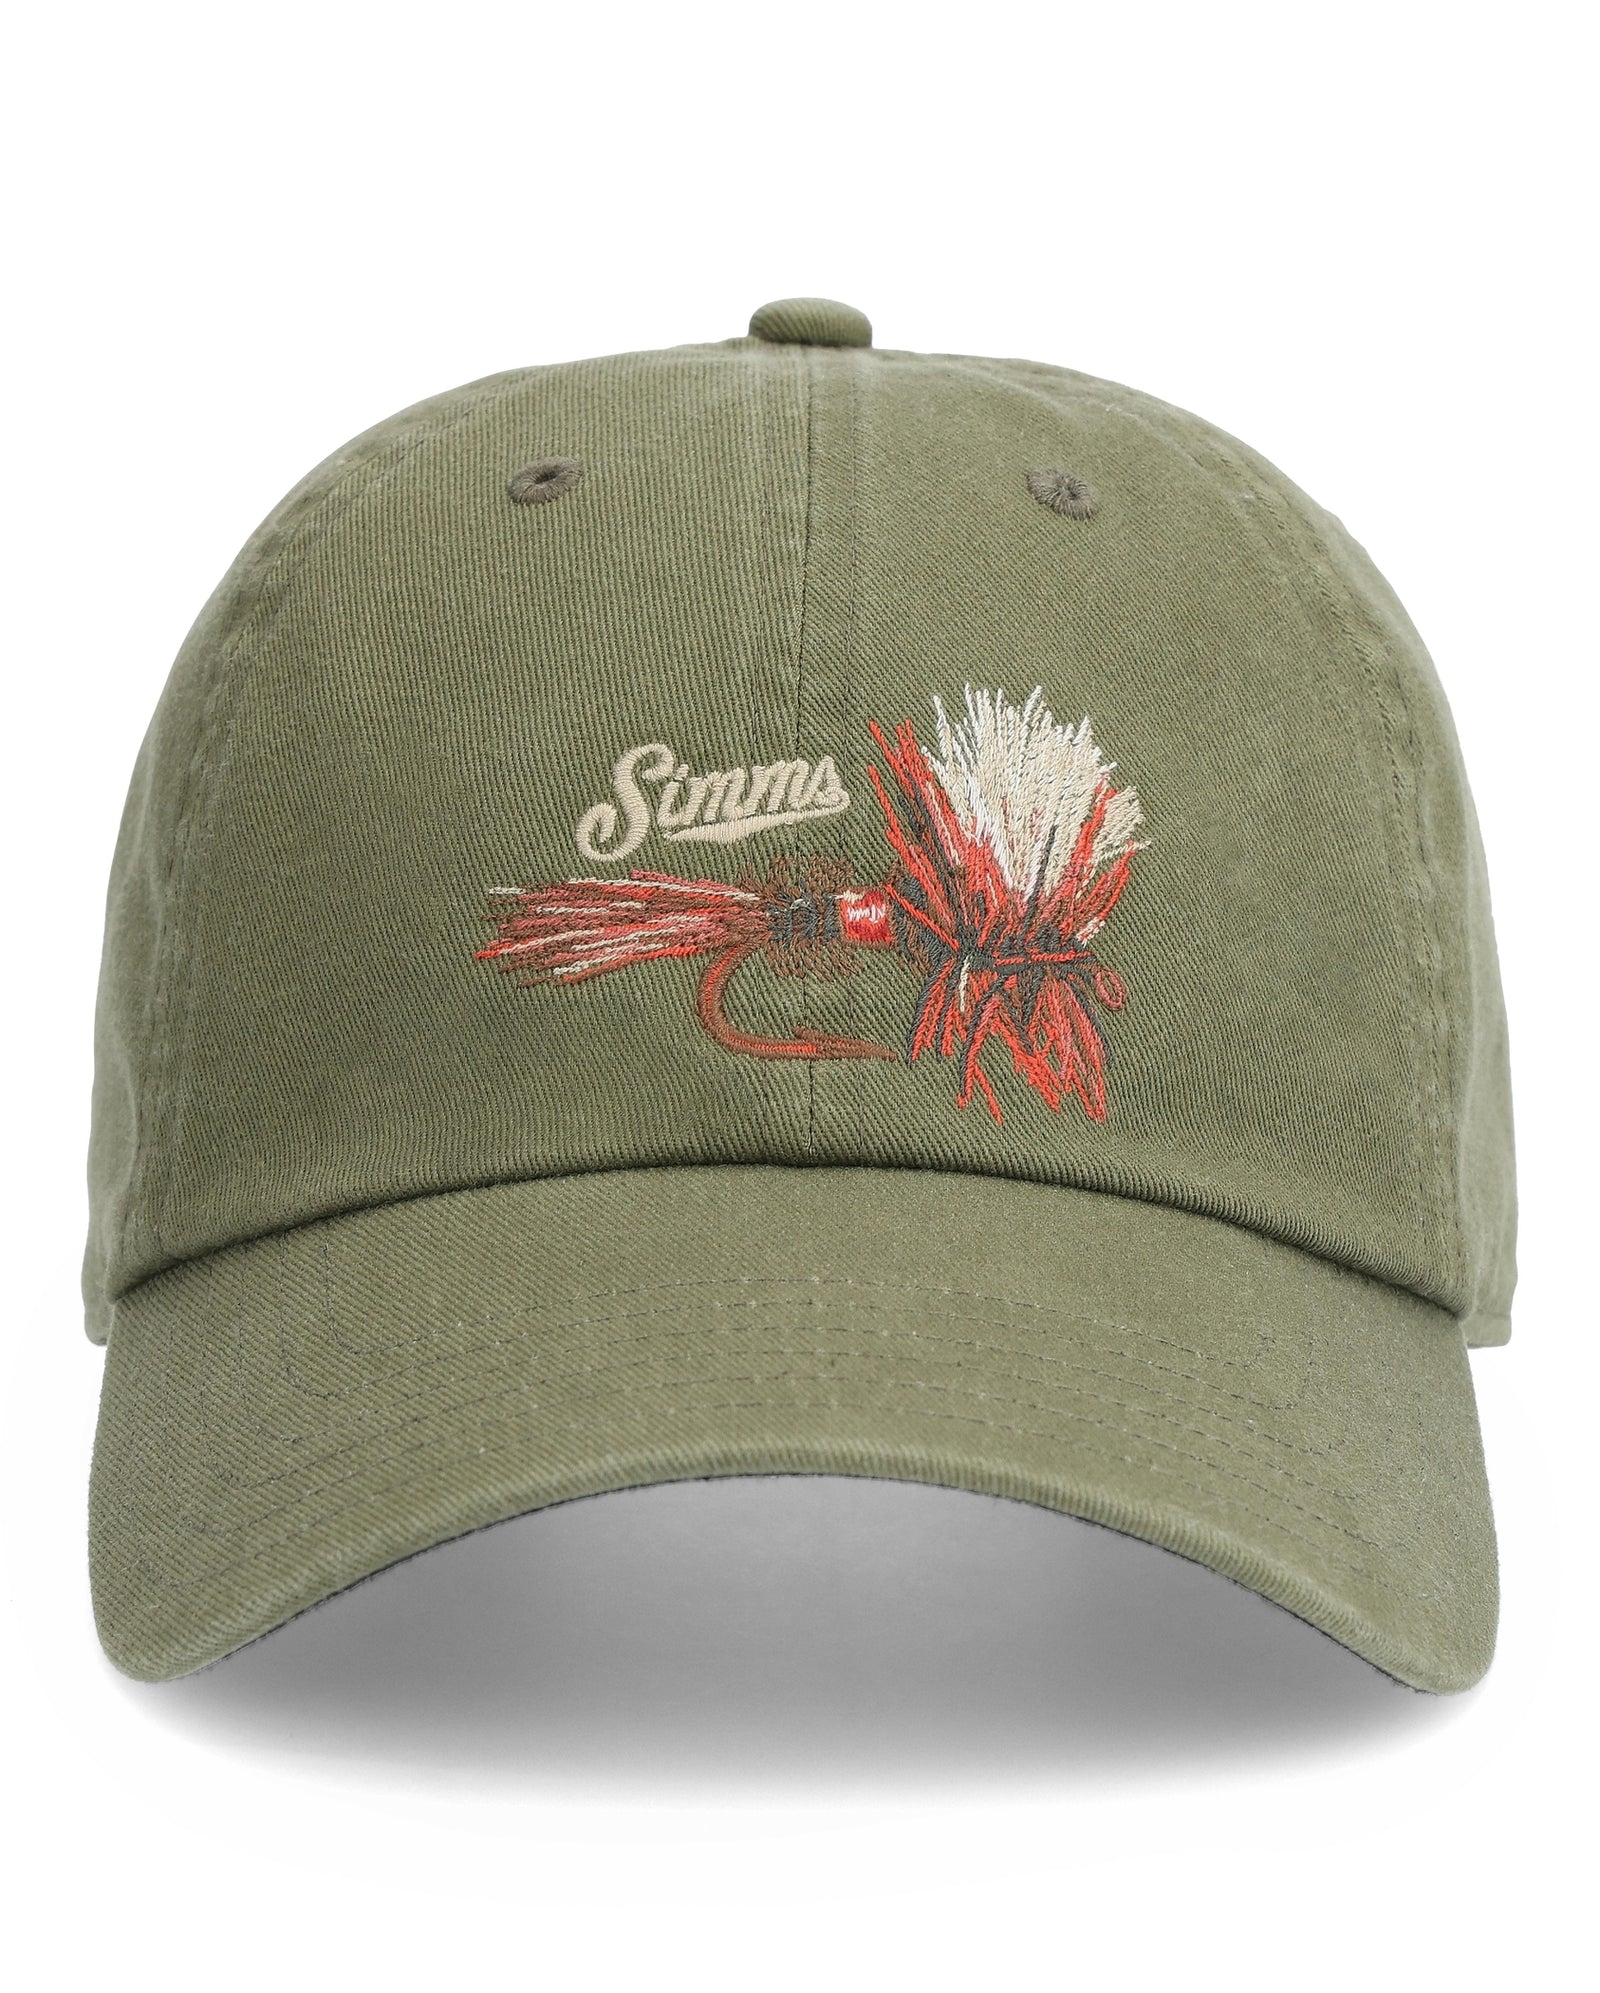 Newest Products Tagged Hat - LOTWSHQ